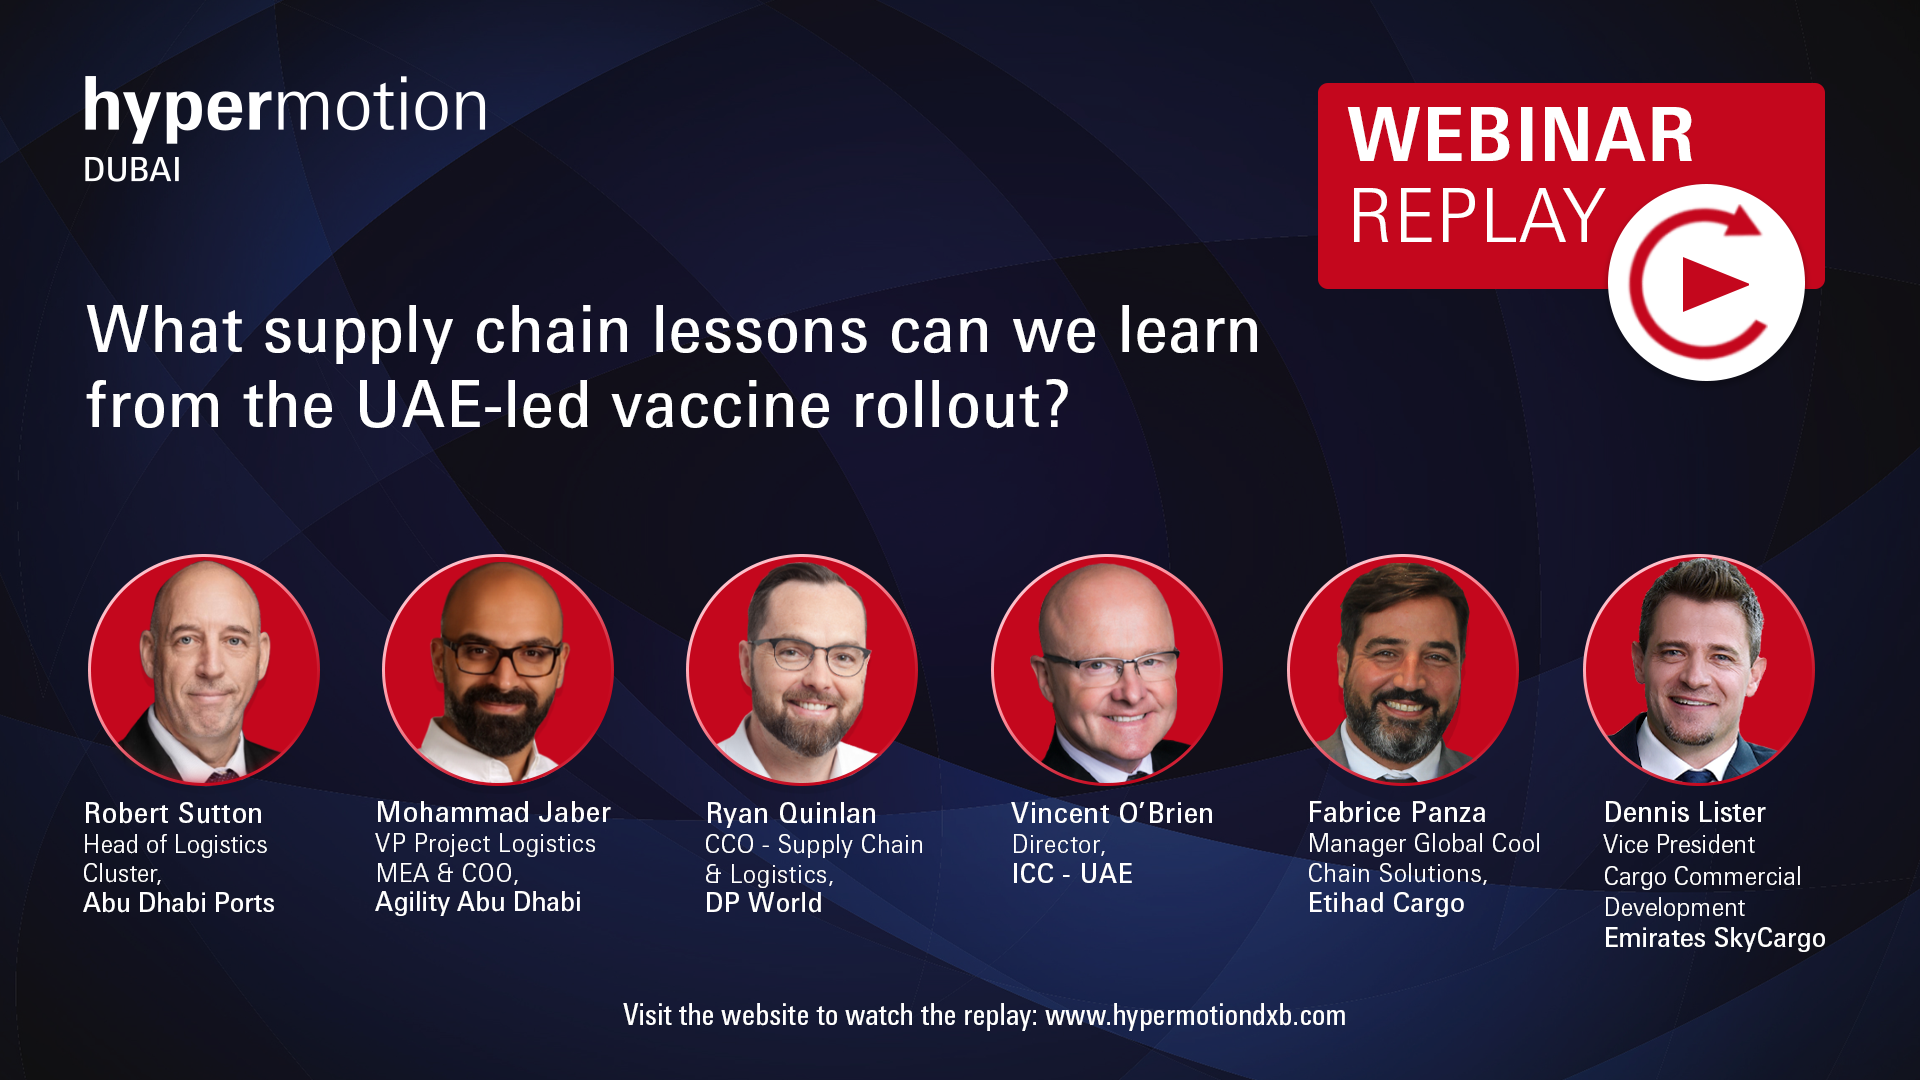 Hypermotion Dubai - What supply chain lessons can we learn from the UAE-led vaccine rollout?